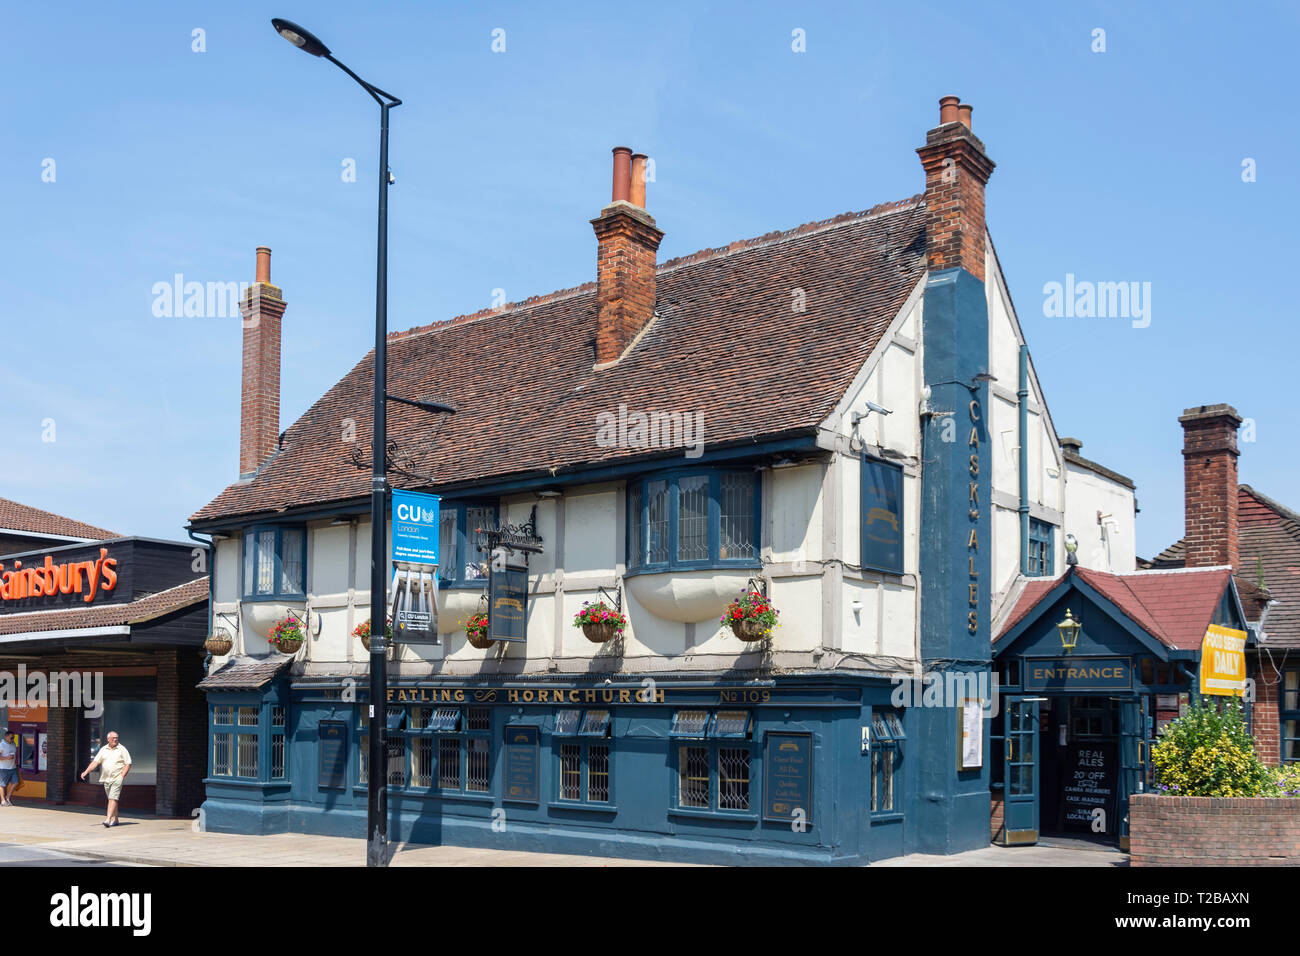 18th Century The Fatling Pub, Hornchurch High Street, Hornchurch, London Borough of Havering, Greater London, England, United Kingdom Stock Photo